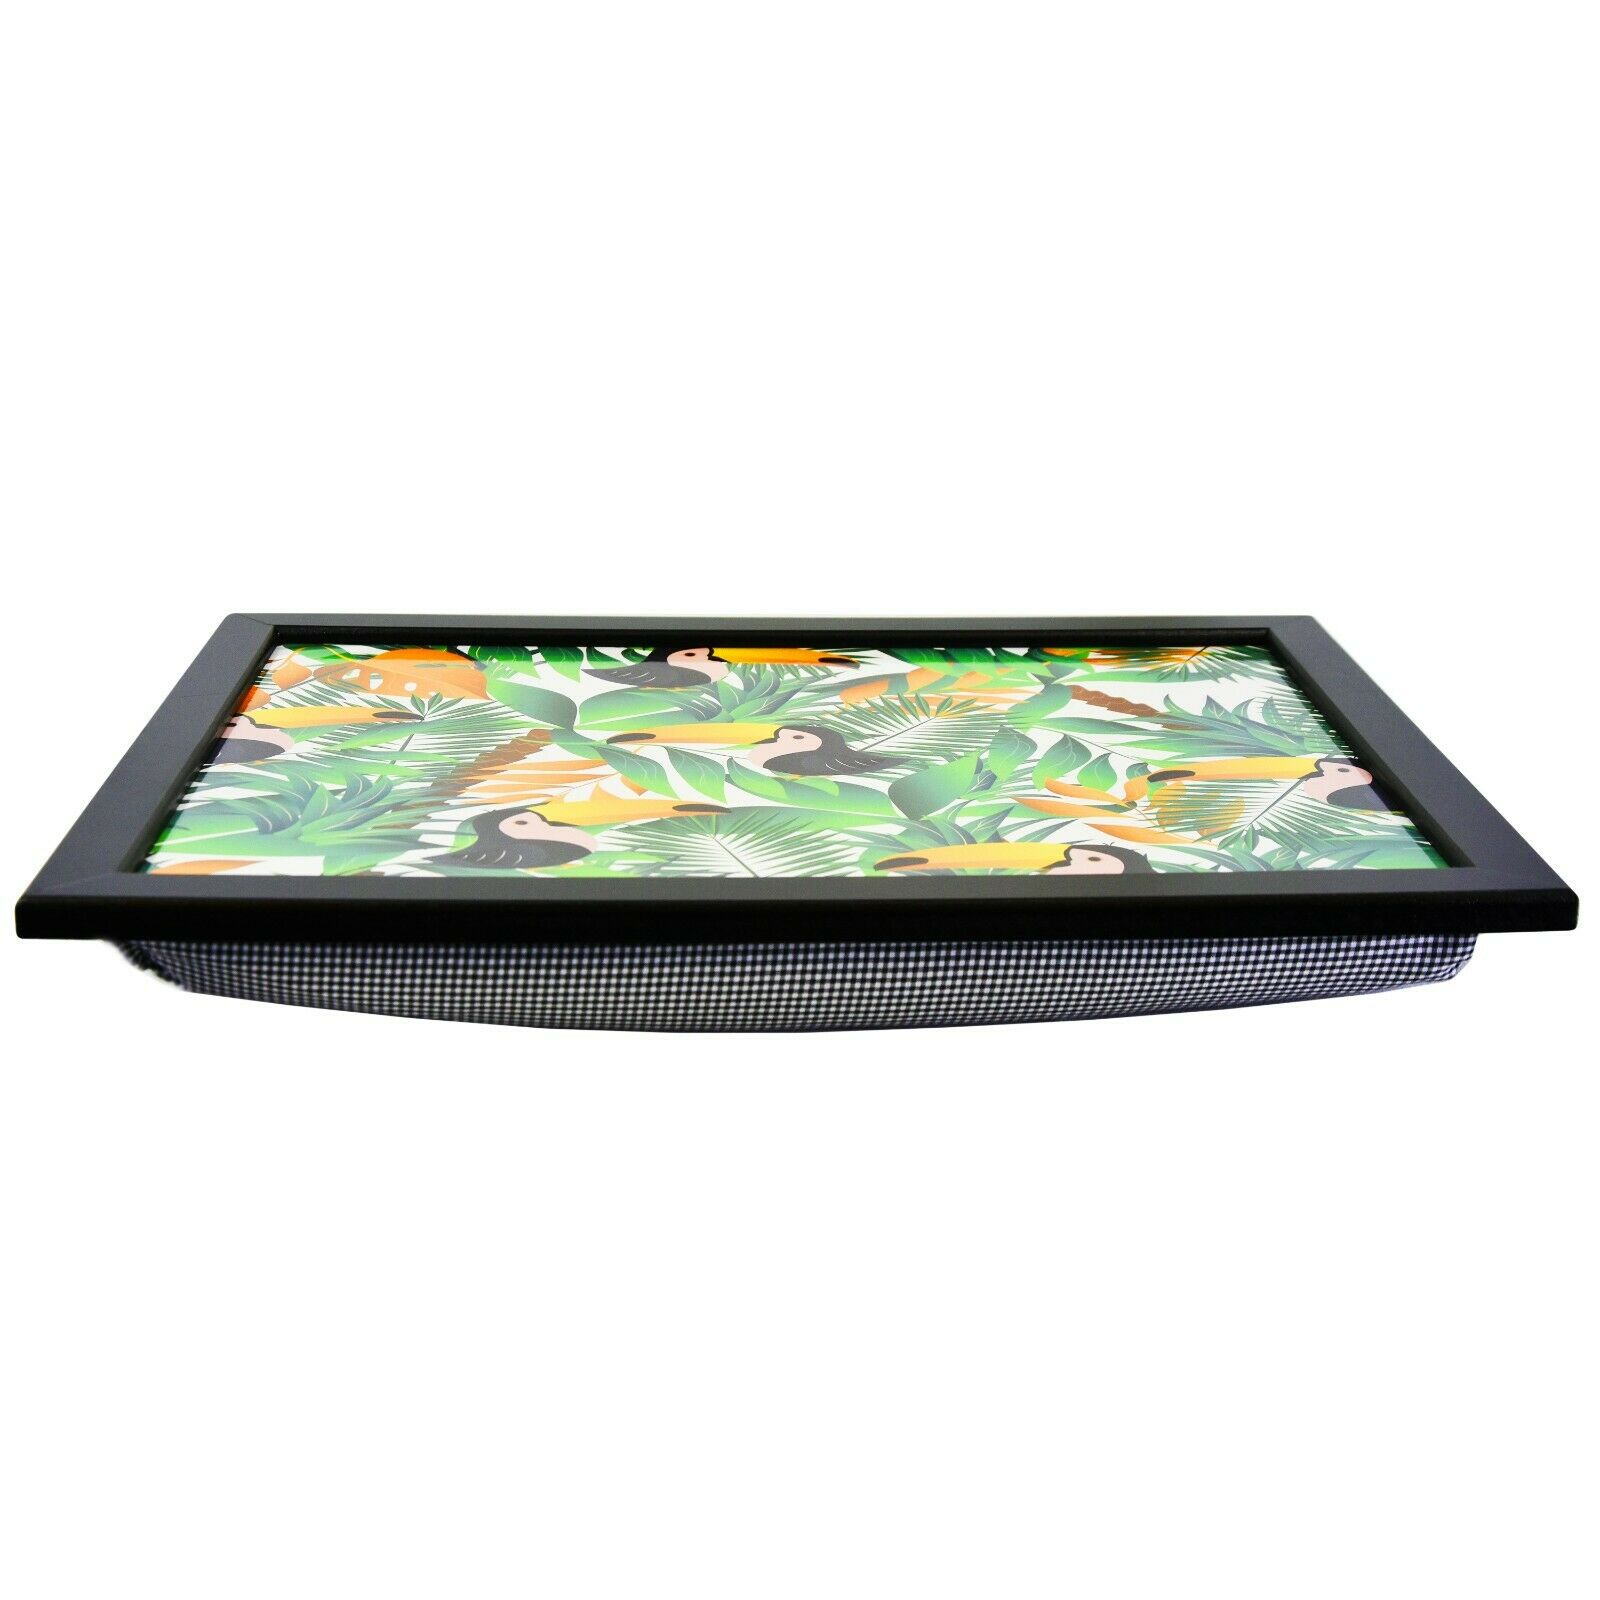 Tropical Lap Tray With Bean Bag Cushion The Magic Toy Shop - The Magic Toy Shop